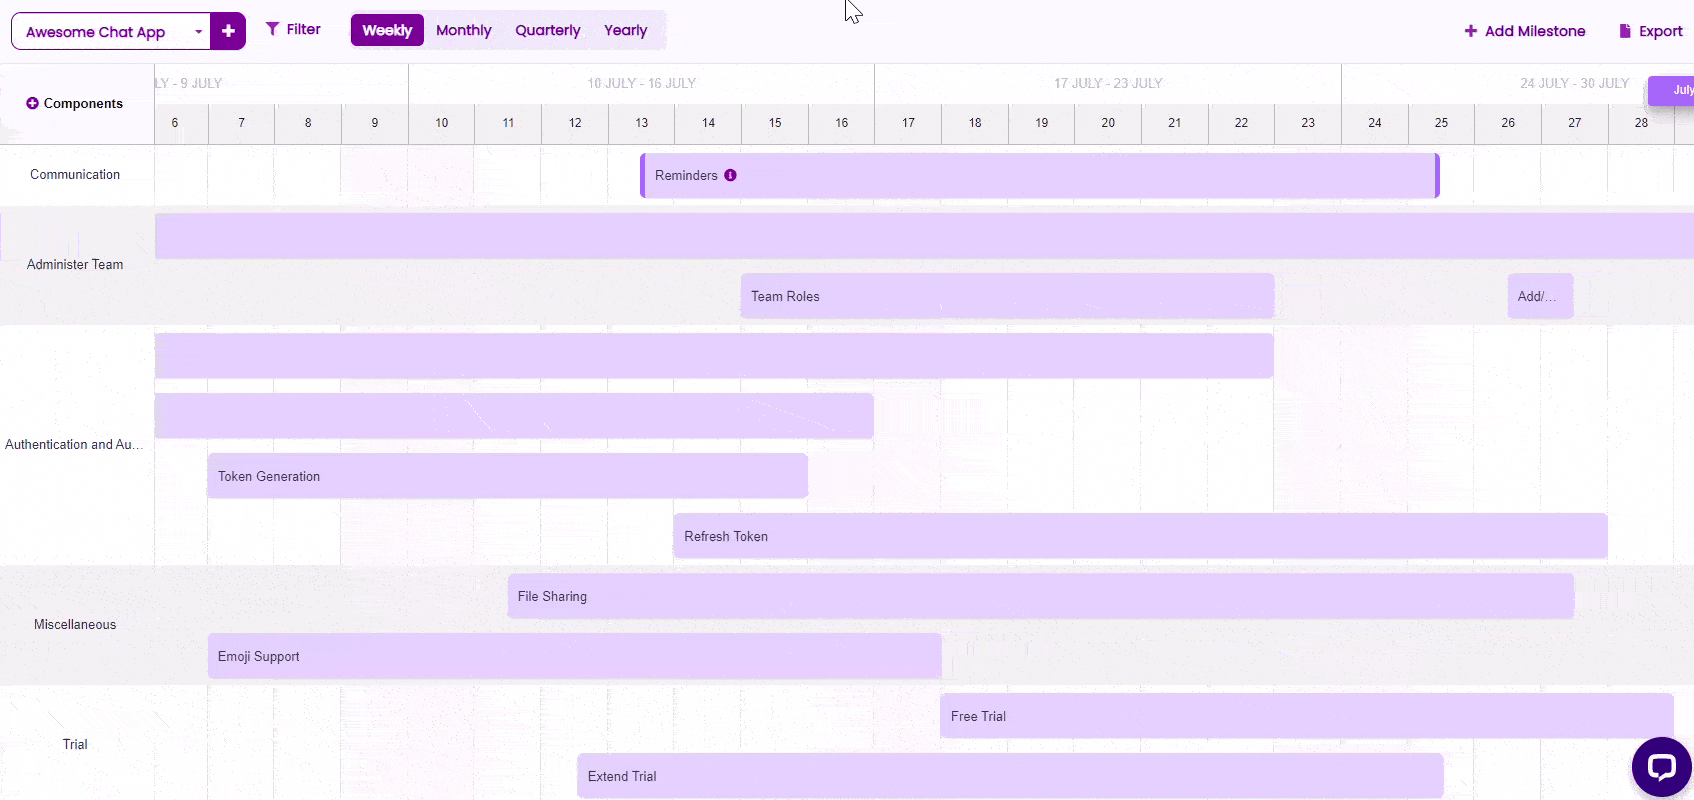 Chisel's timeline tool gives you a view of weekly, quarterly, and yearly goals. 